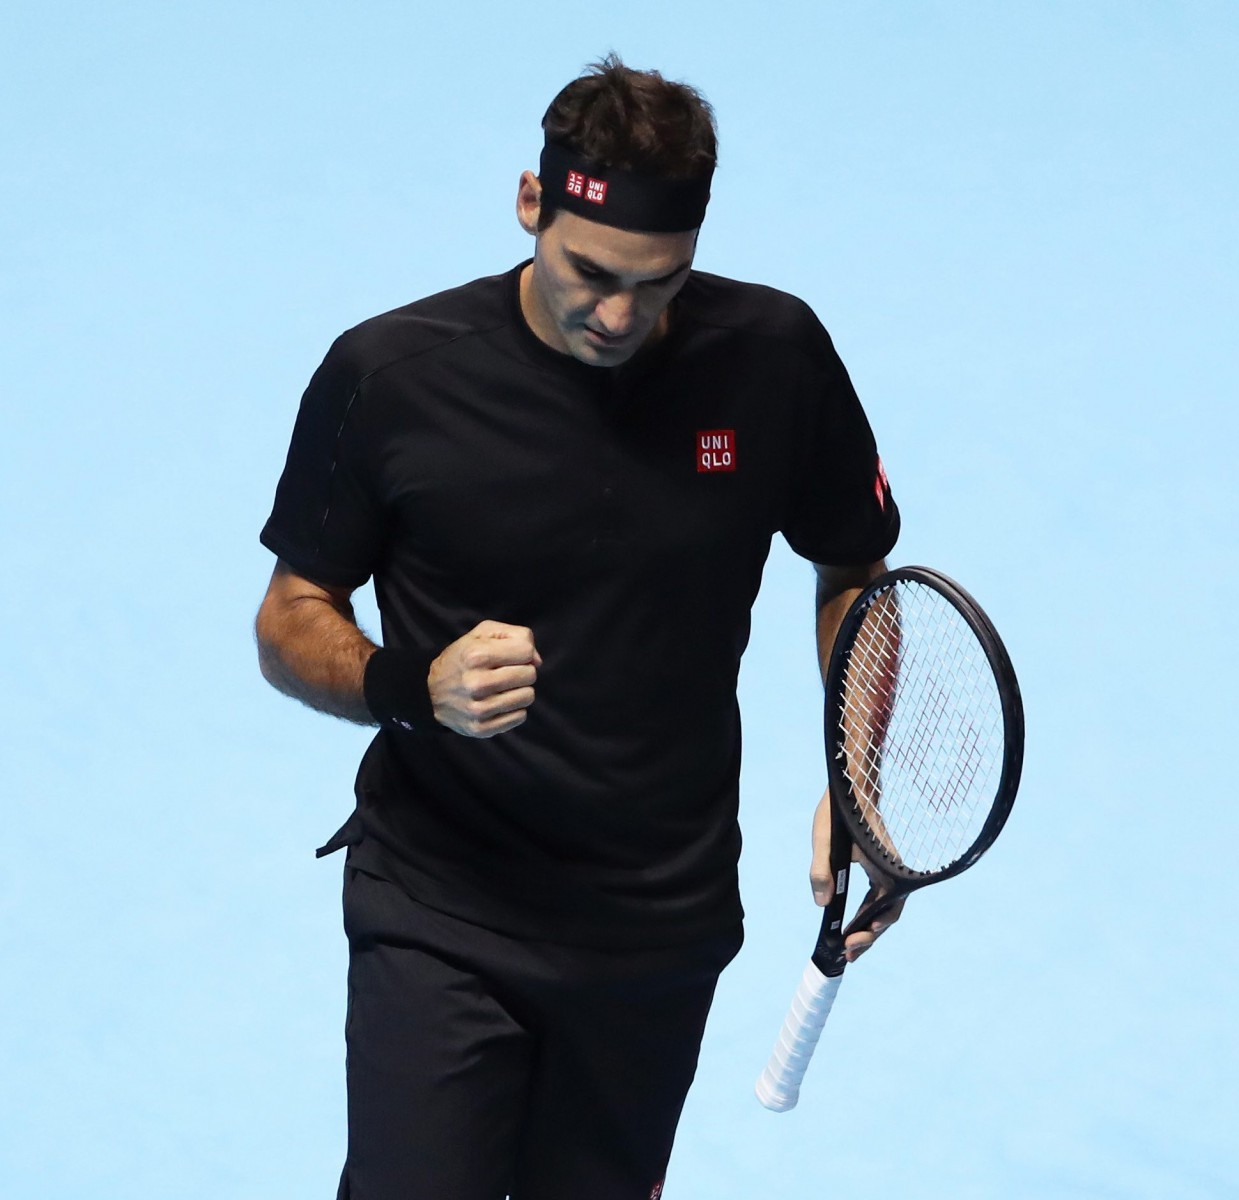 Federer was near-enough perfect, especially on his serve, to get his first win over Djokovic for four years